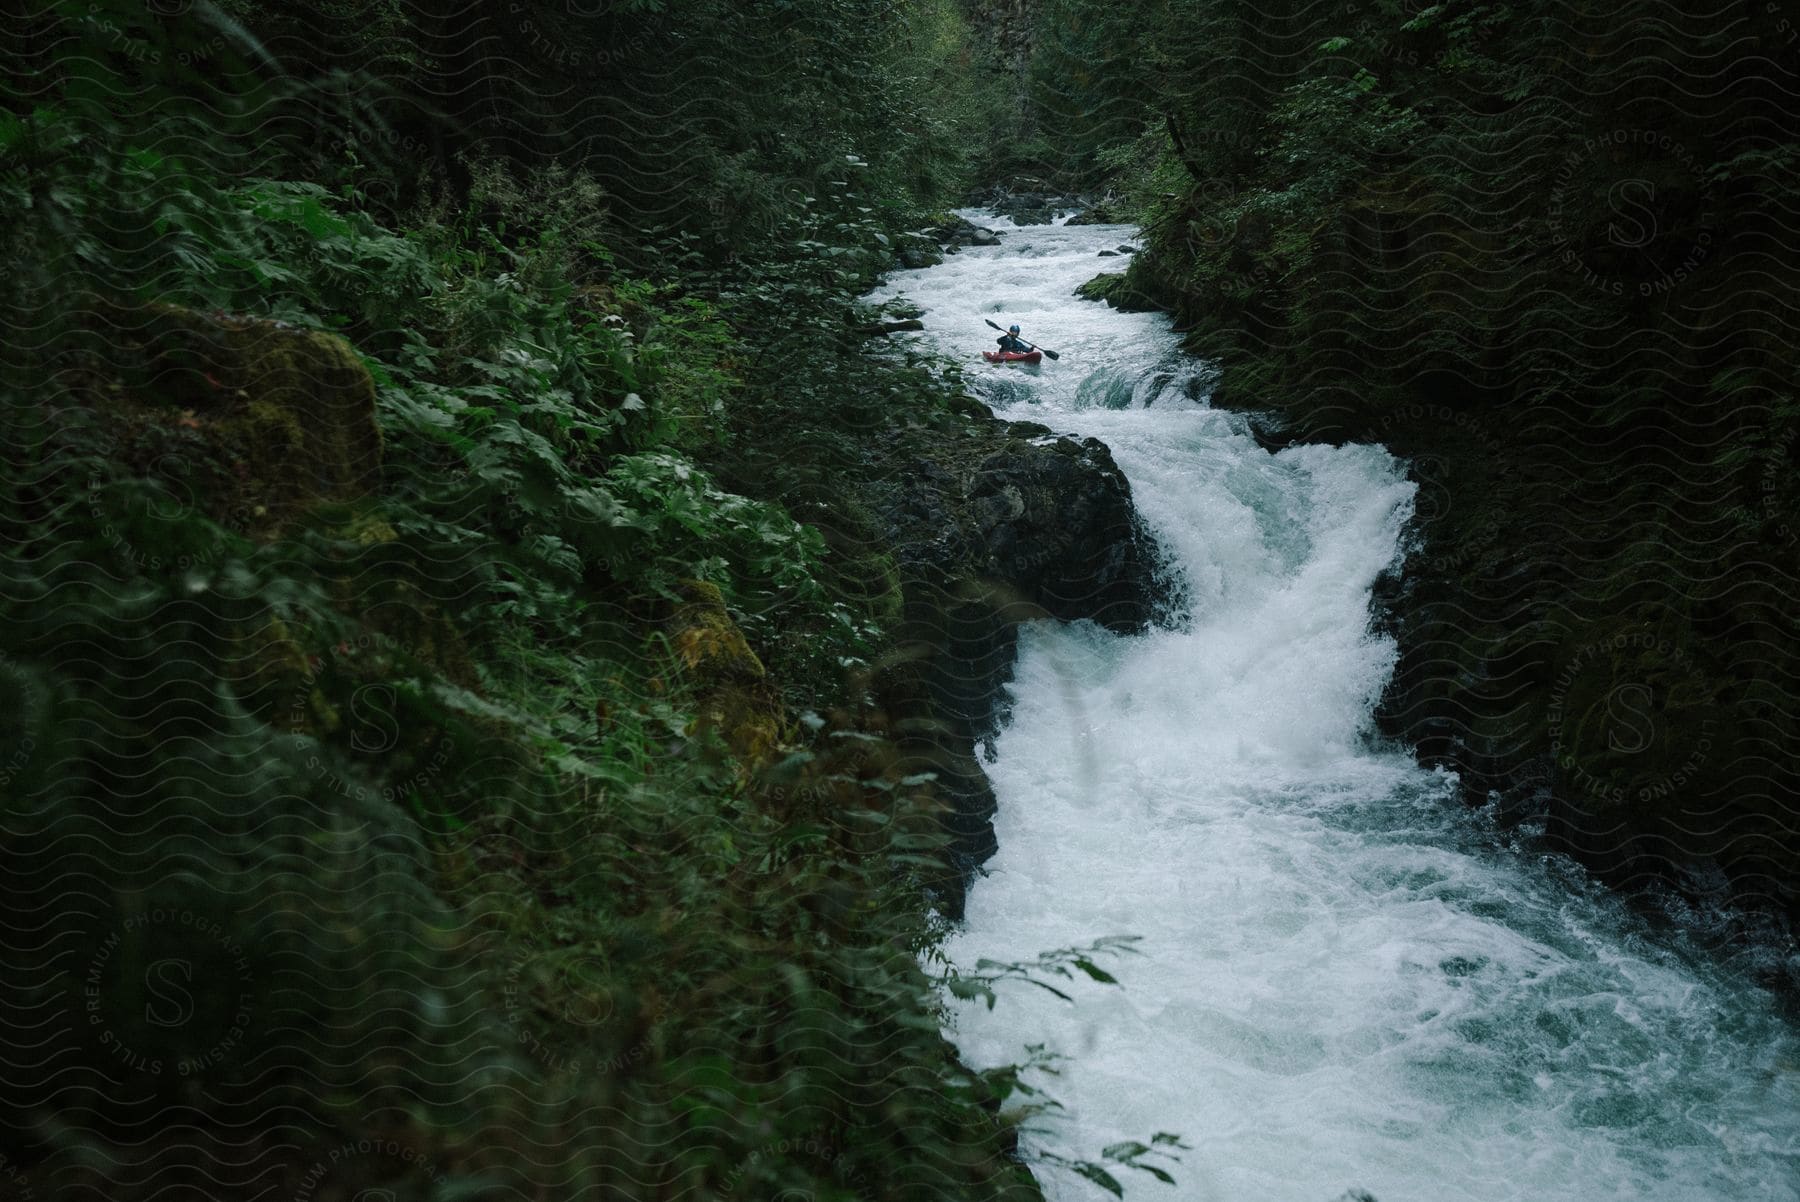 A person in a canoe paddles down the rapids of a forest stream.